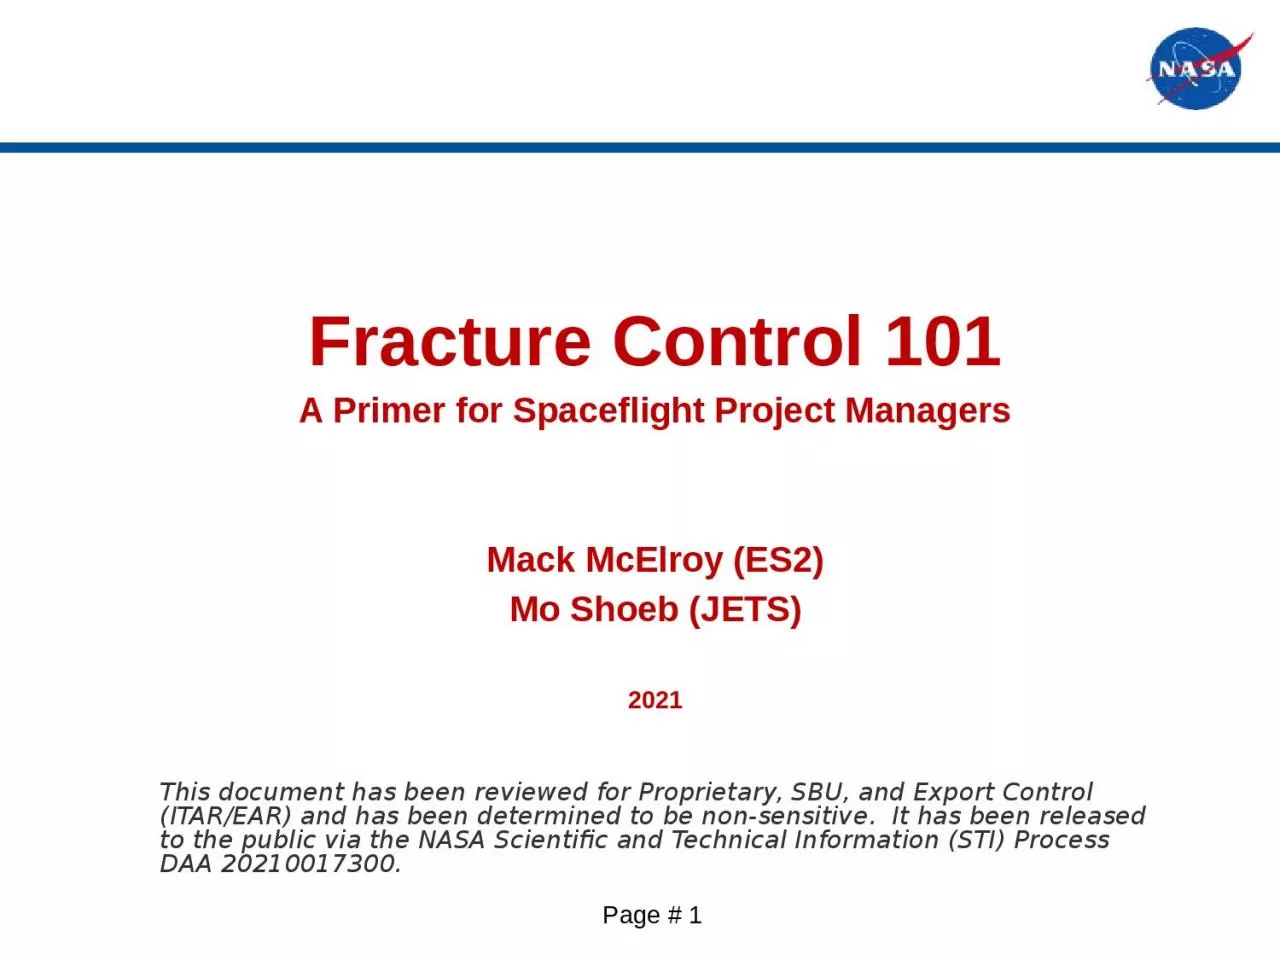 Fracture Control 101 A Primer for Spaceflight Project Managers